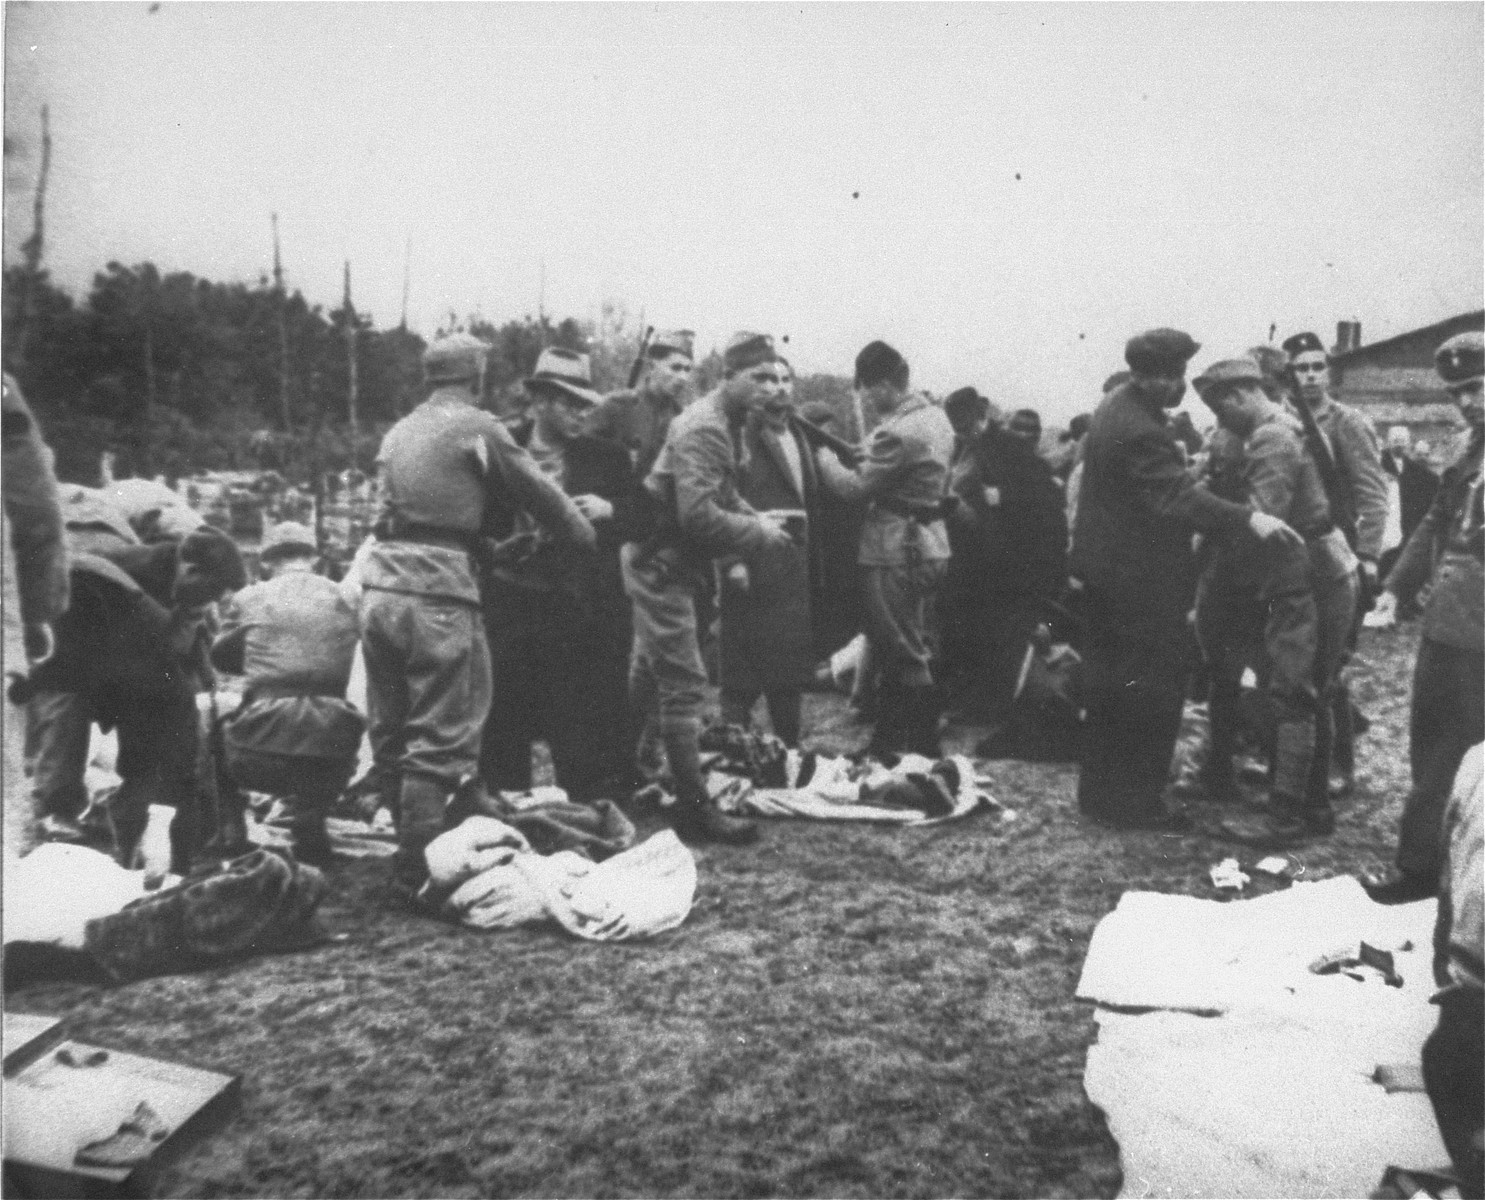 Ustasa guards in the Jasenovac concentration camp strip newly arrived prisoners of their personal possessions.

Andor Willer is pictured in the left foreground (left) in the light colored hat and dark overcoat being manhandled.  Mr. Willer perished in Jasenovac on December 25, 1944, along with his parents, brothers, and sisters.